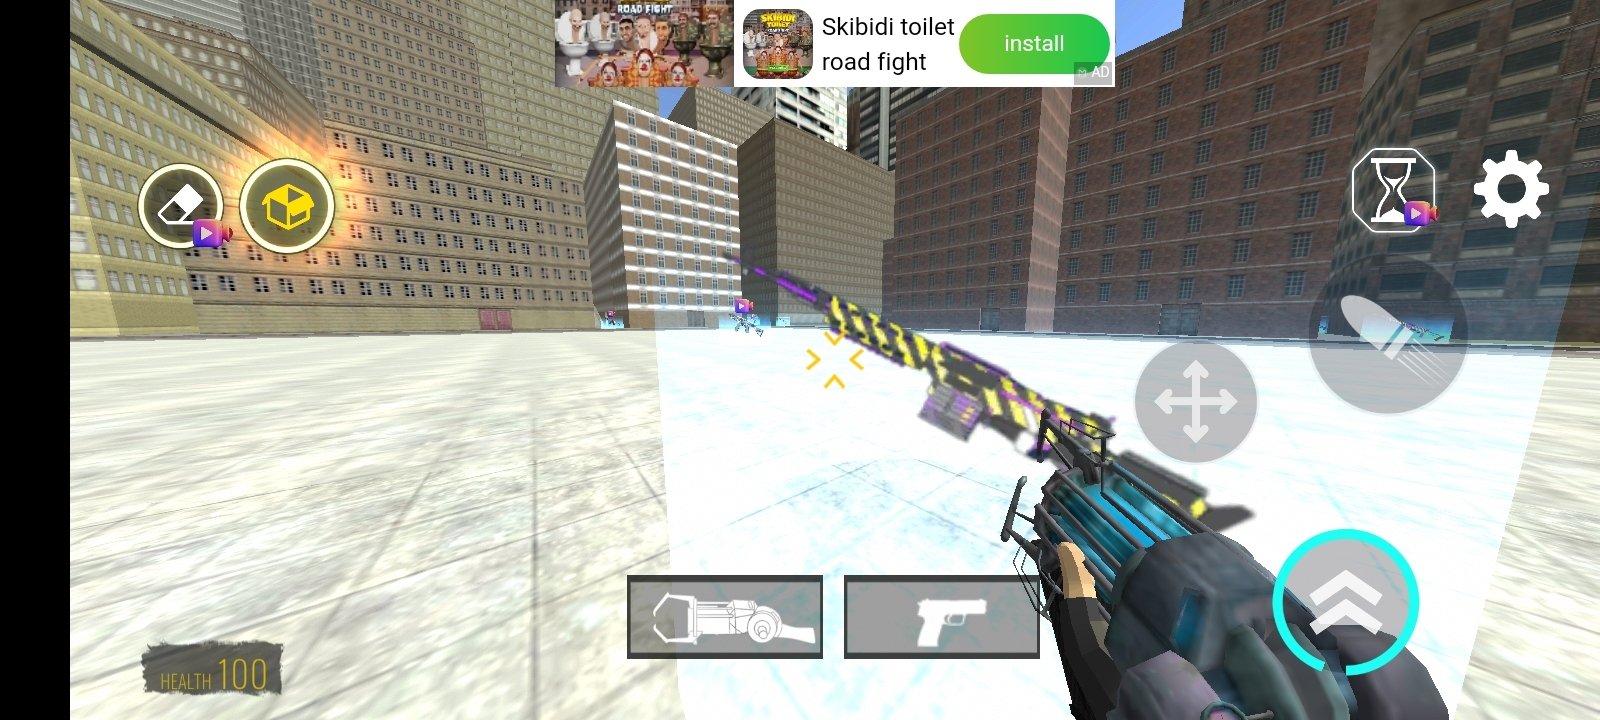 Nextbots In Backrooms: Sandbox APK Download for Android Free